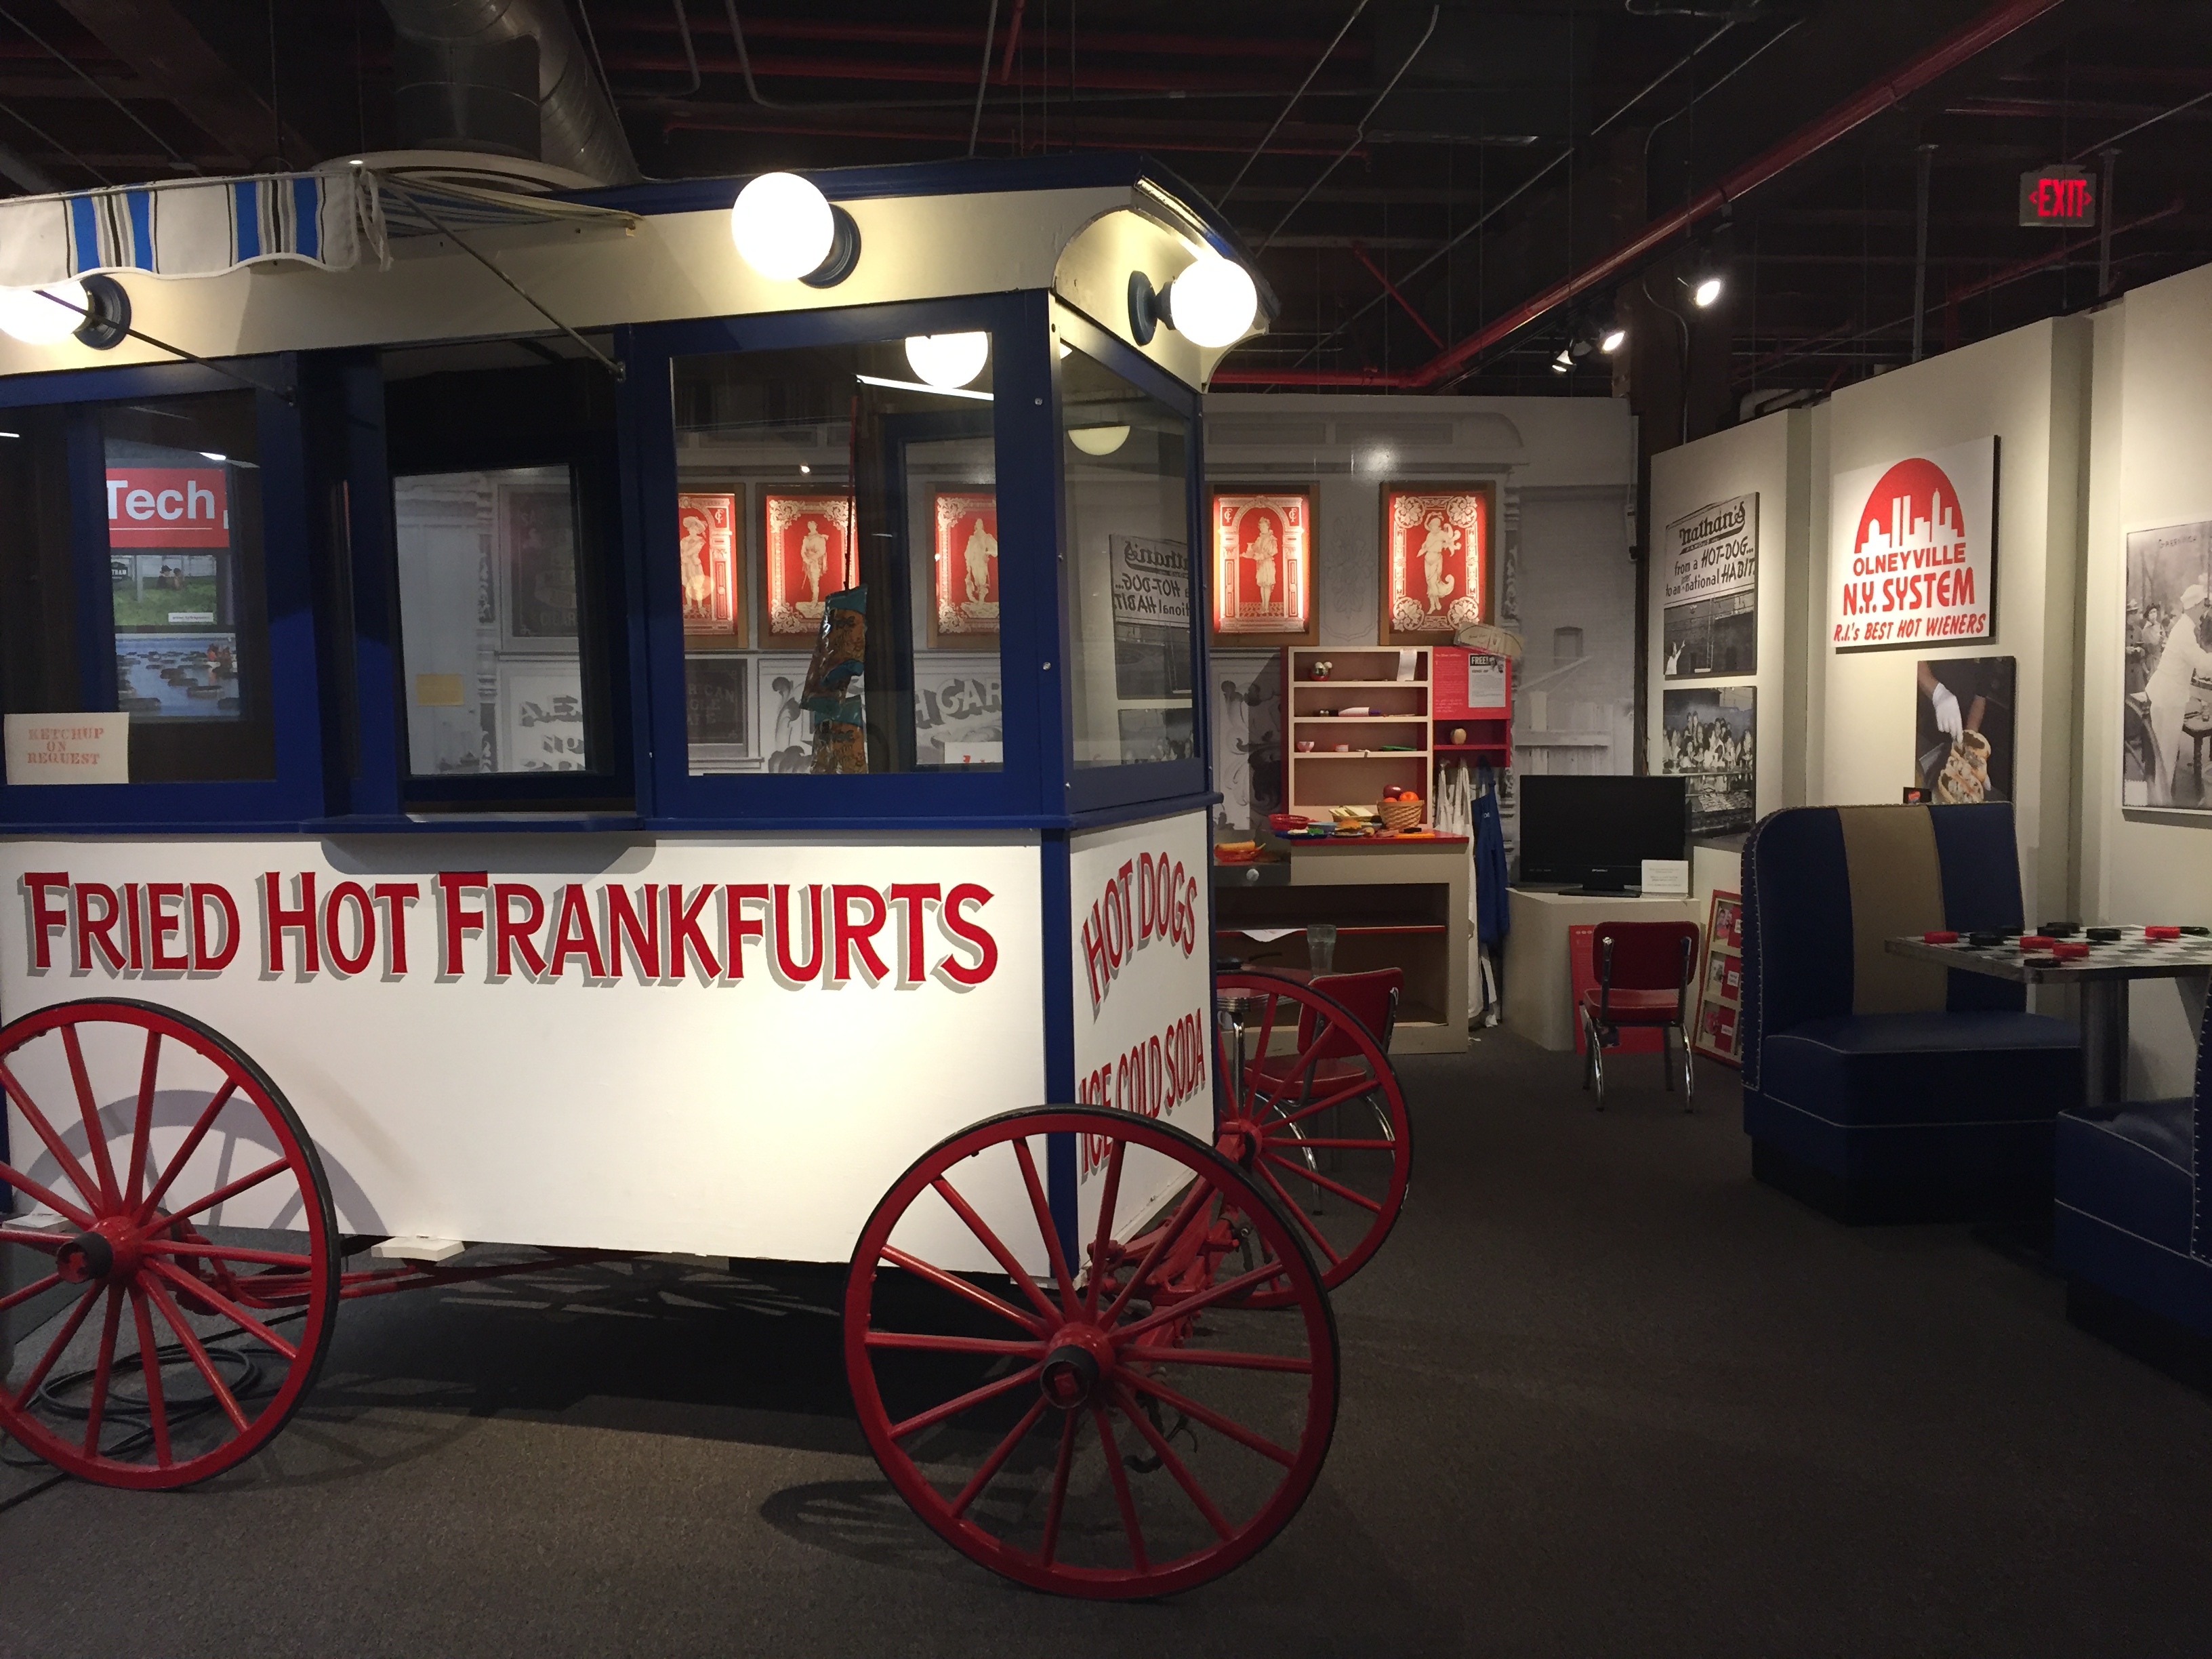 Antique frankfurter cart on display at the museum